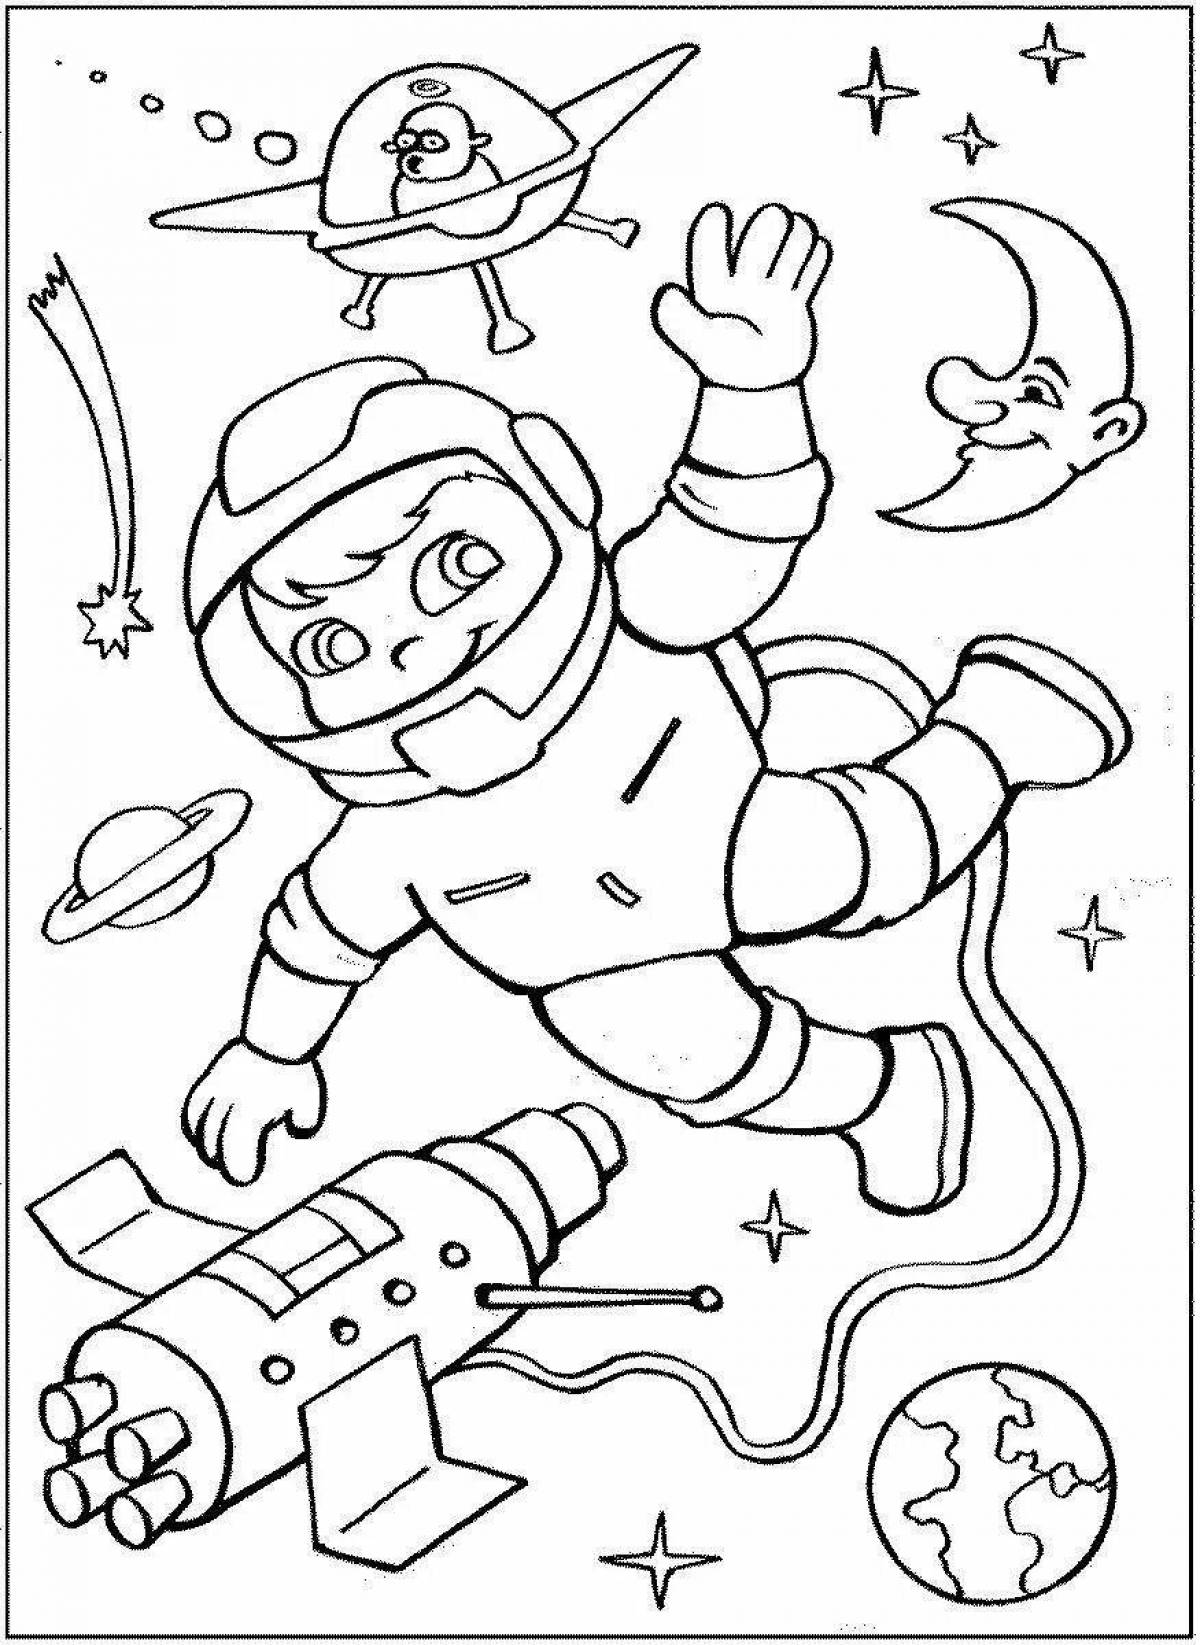 Magic space coloring book for 4-5 year olds